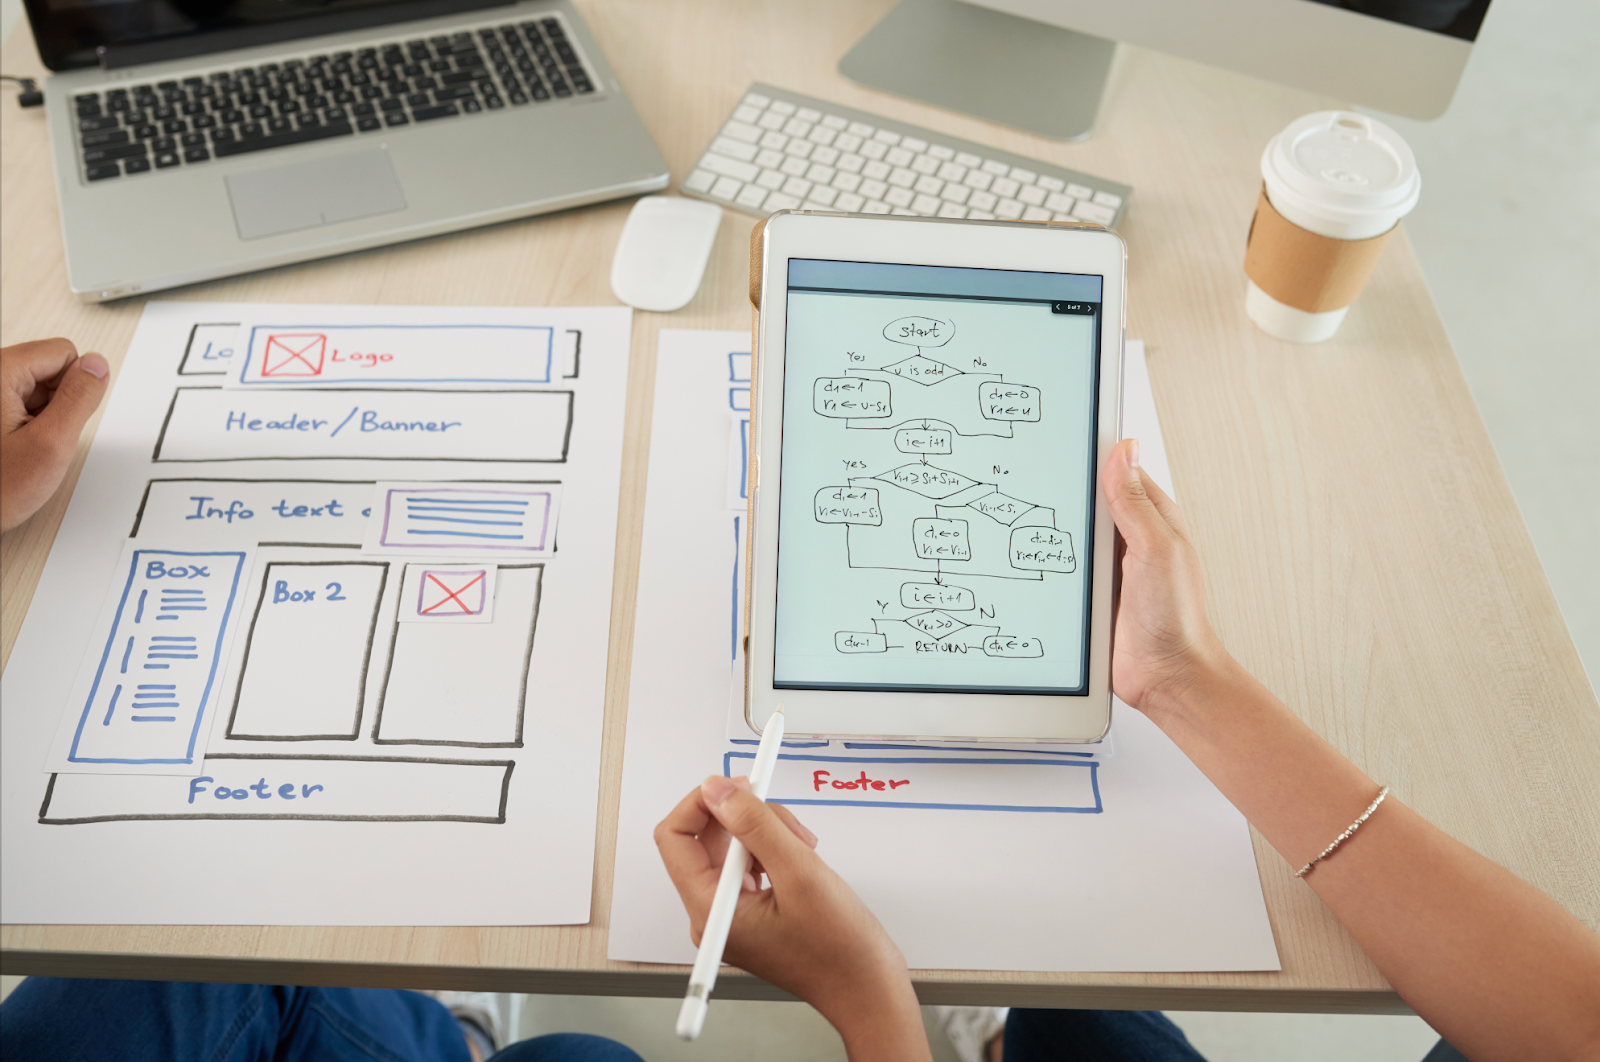 UX wireframes displayed on tablet and on paper